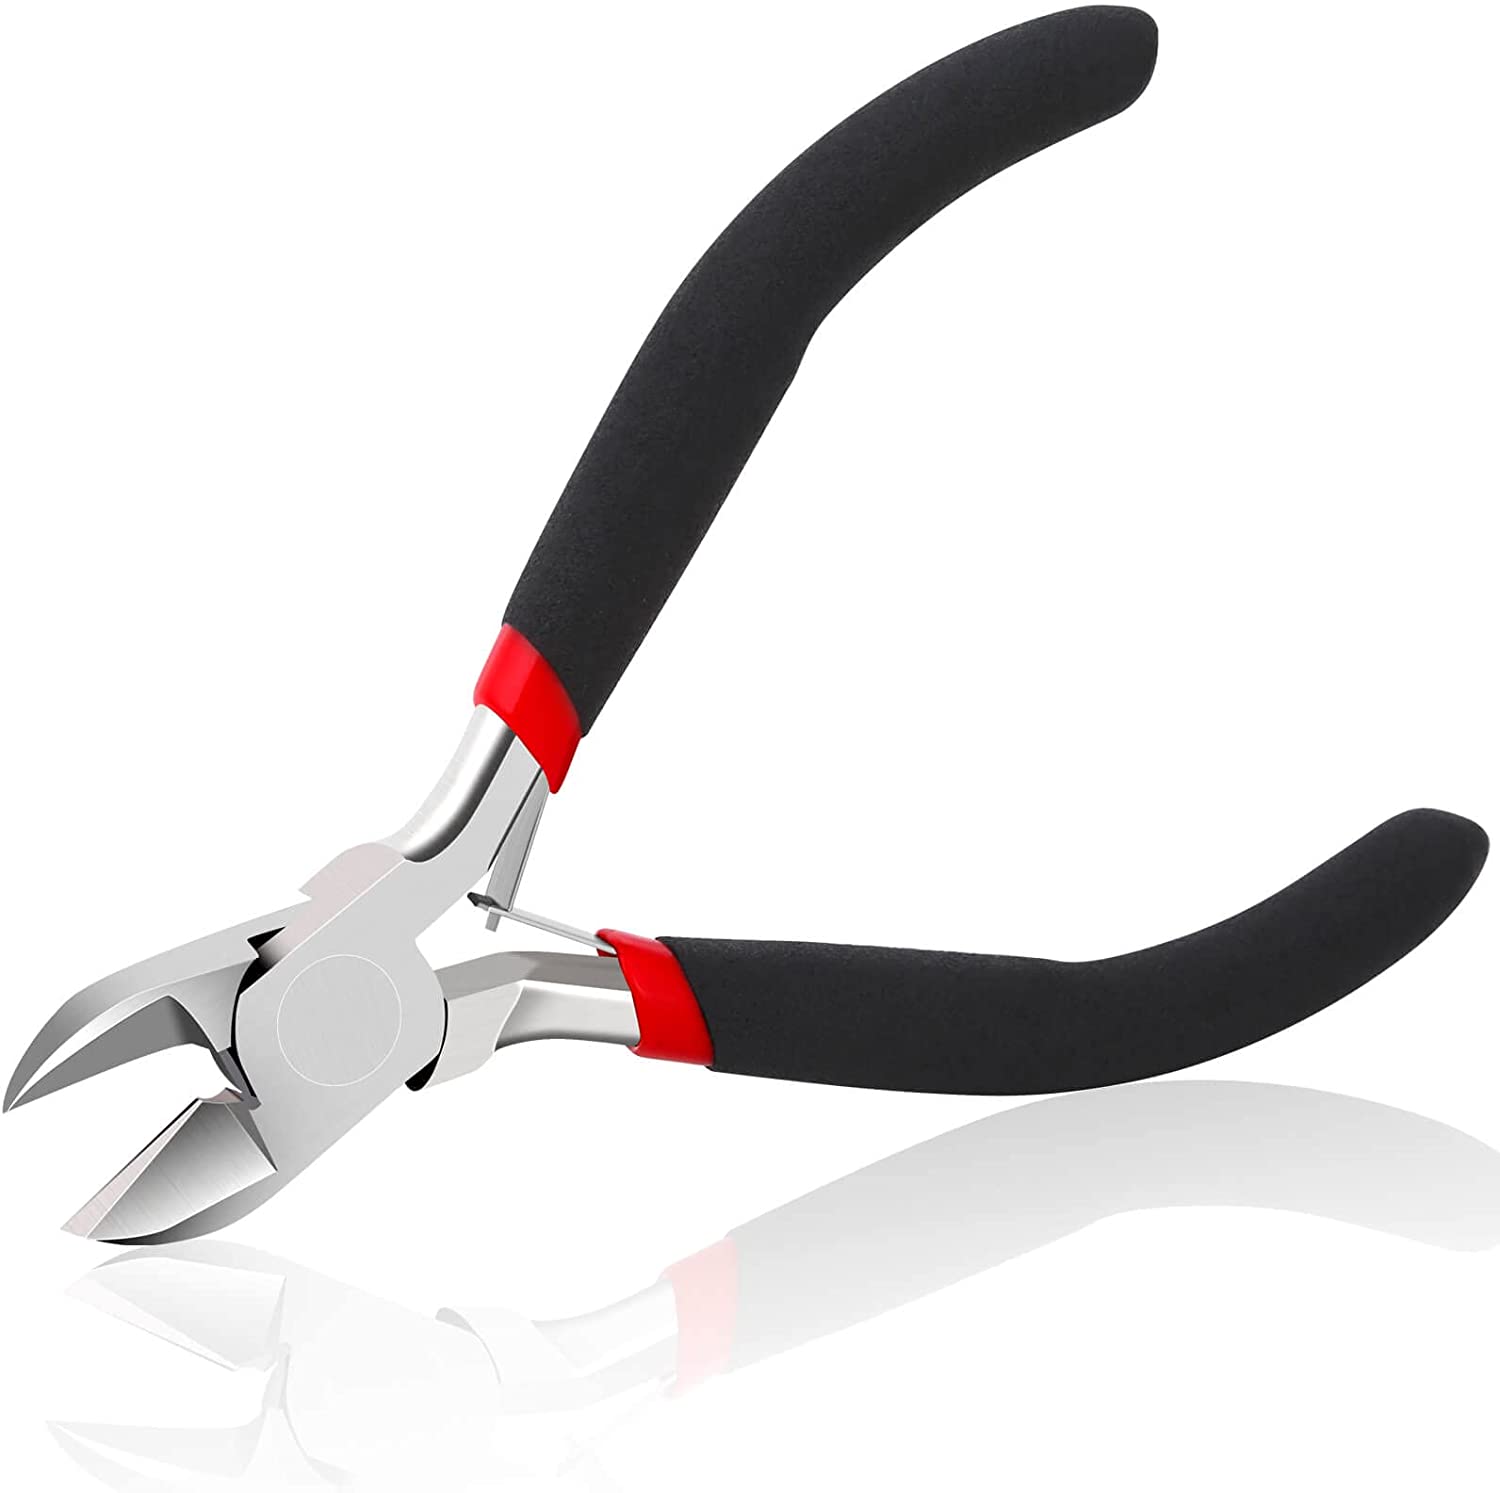 IGAN 7-inch Wire Cutters, Spring-loaded Side Cutters Dikes, Ultra Tough and  Durable Diagonal Cutting Pliers in CRV Steel, Heavy Duty Cutting Pliers